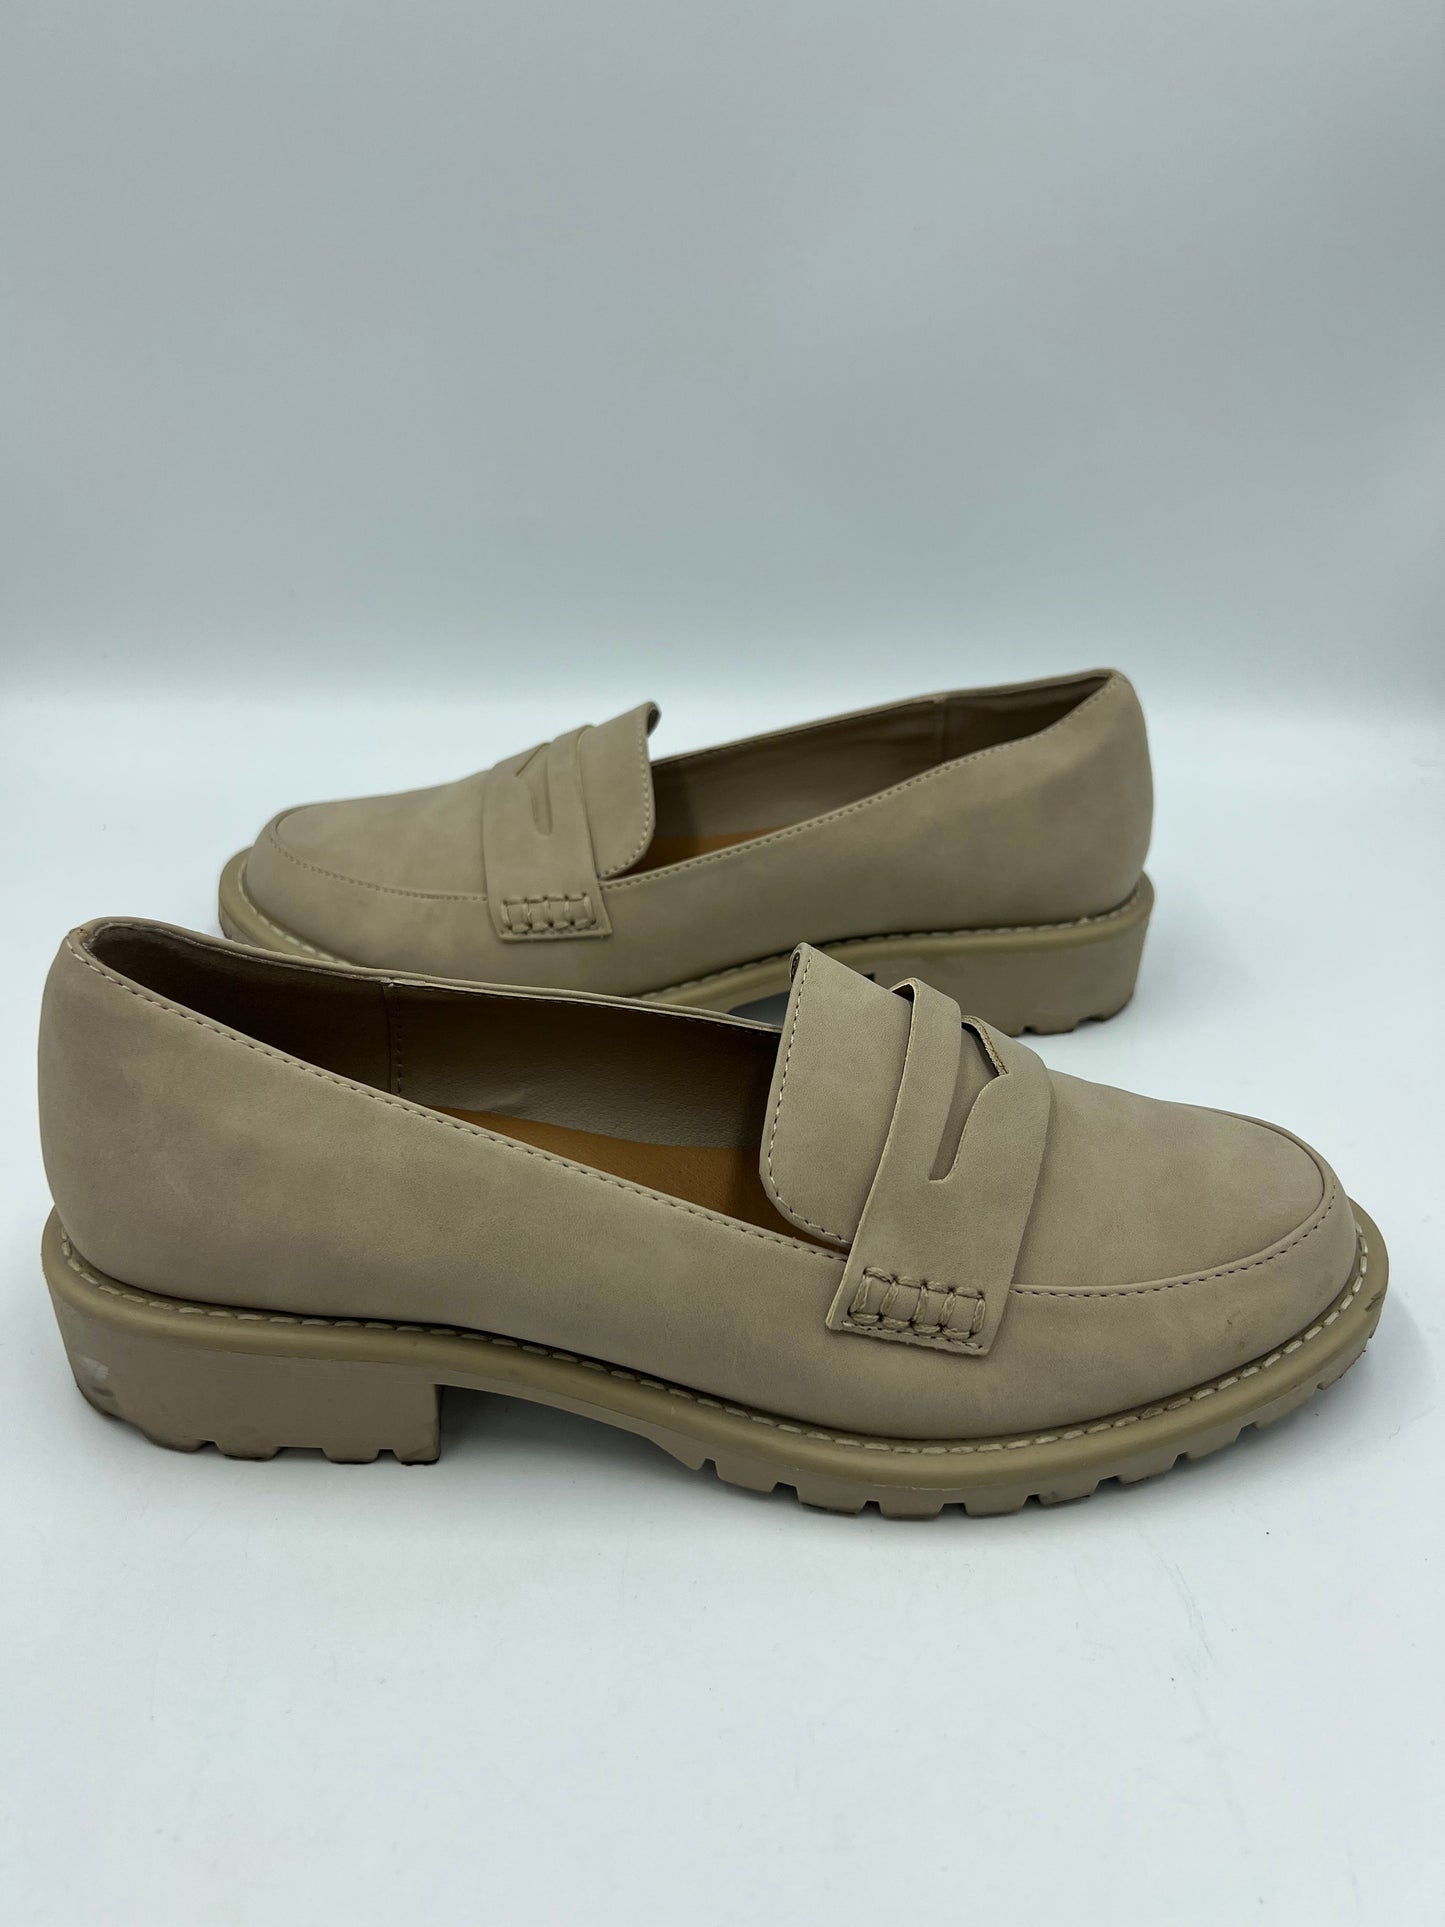 Loafers By Dolce Vita  Size: 8